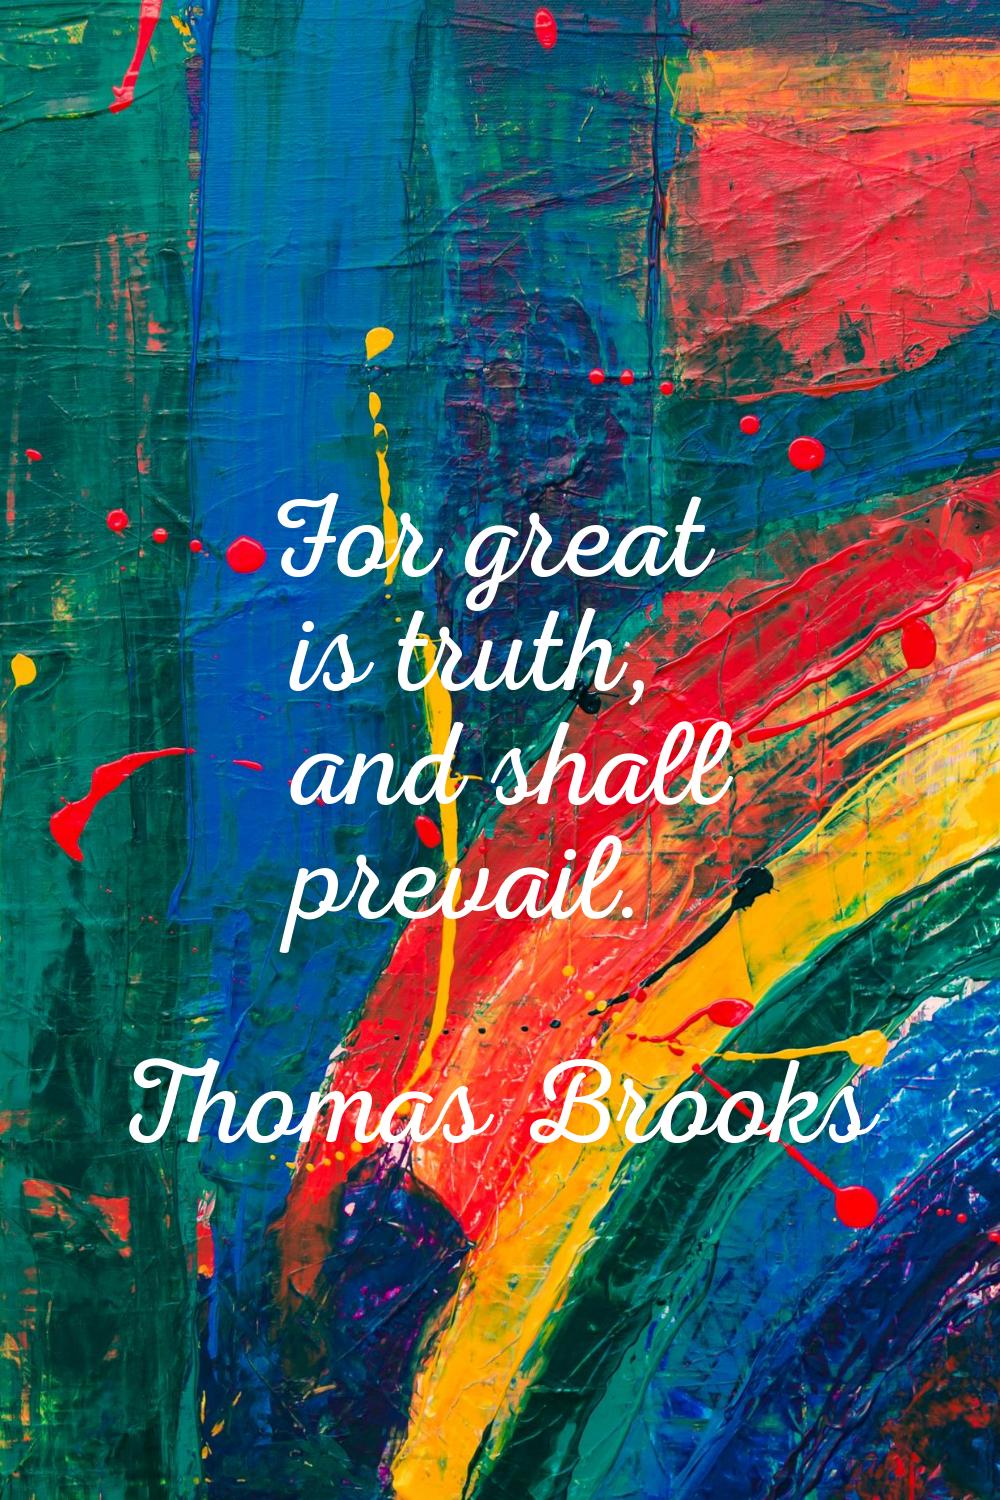 For great is truth, and shall prevail.